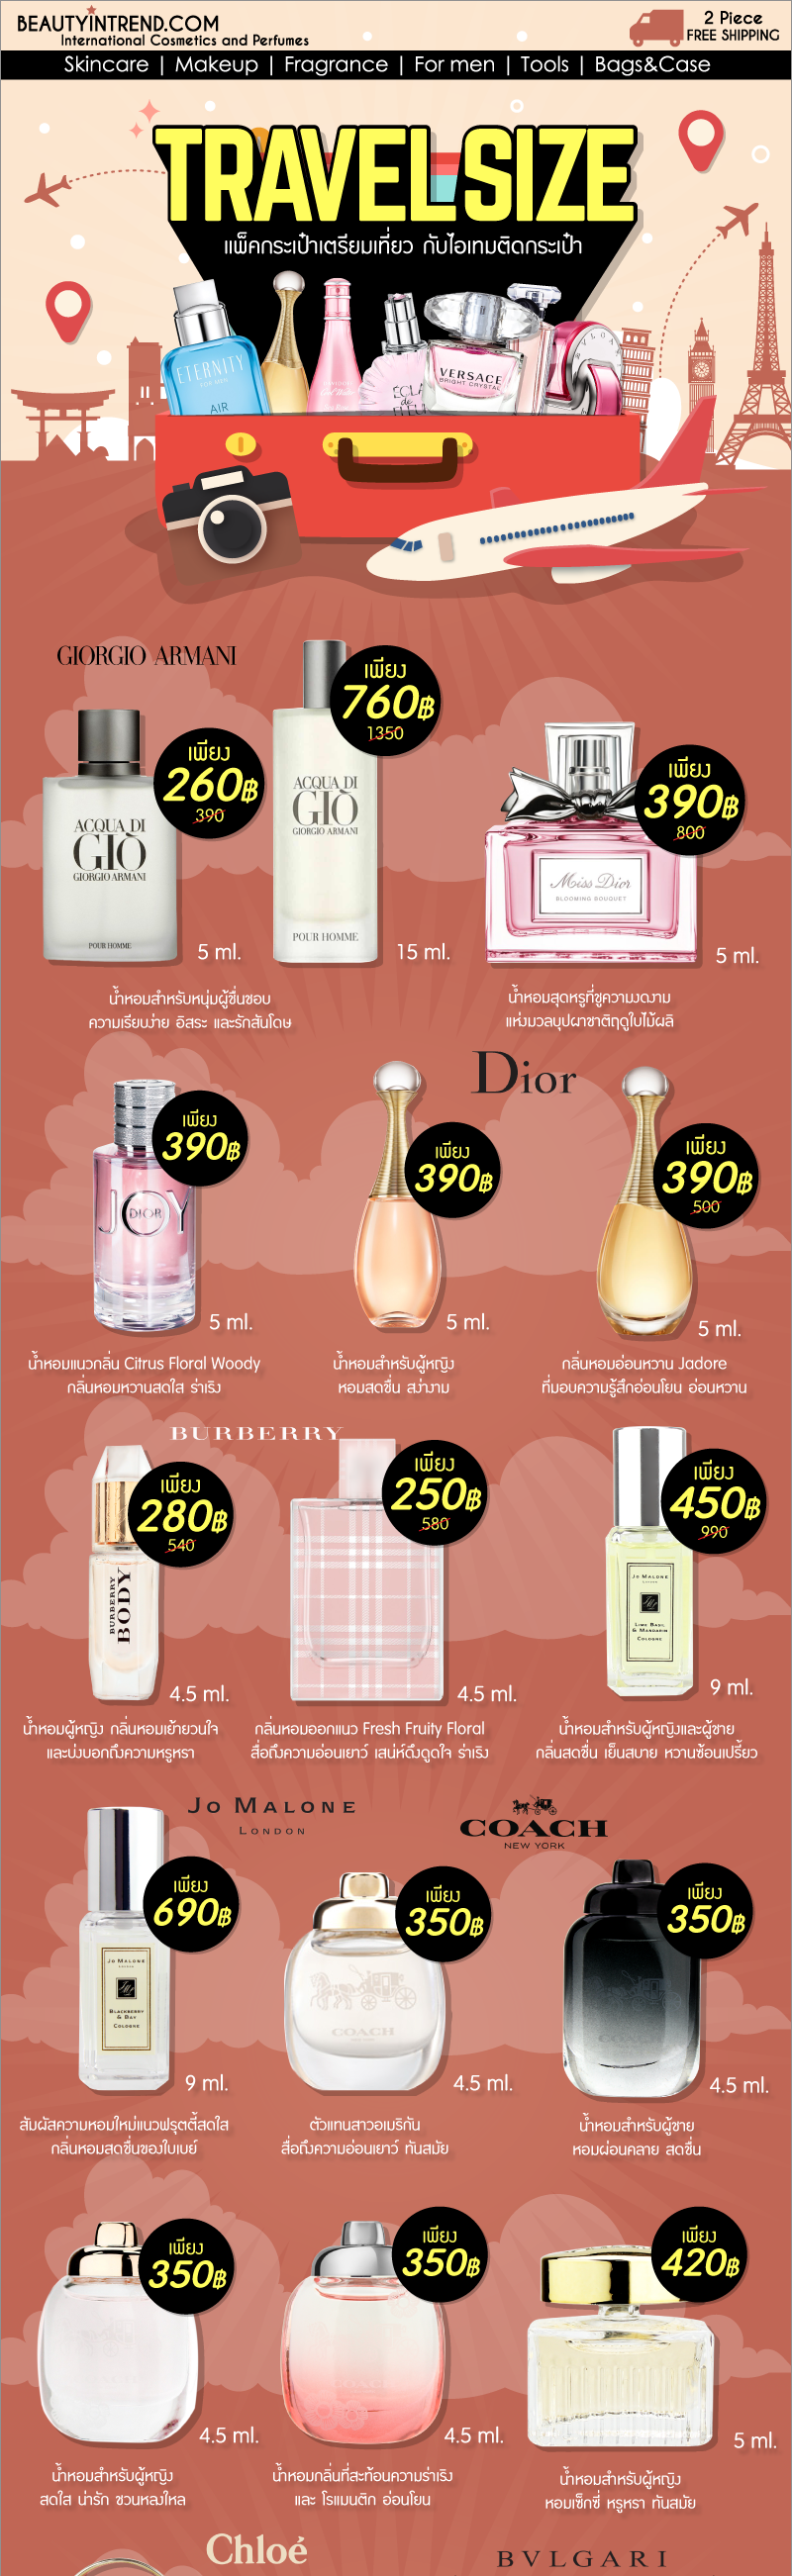 Travel-Size--perfume-1.png